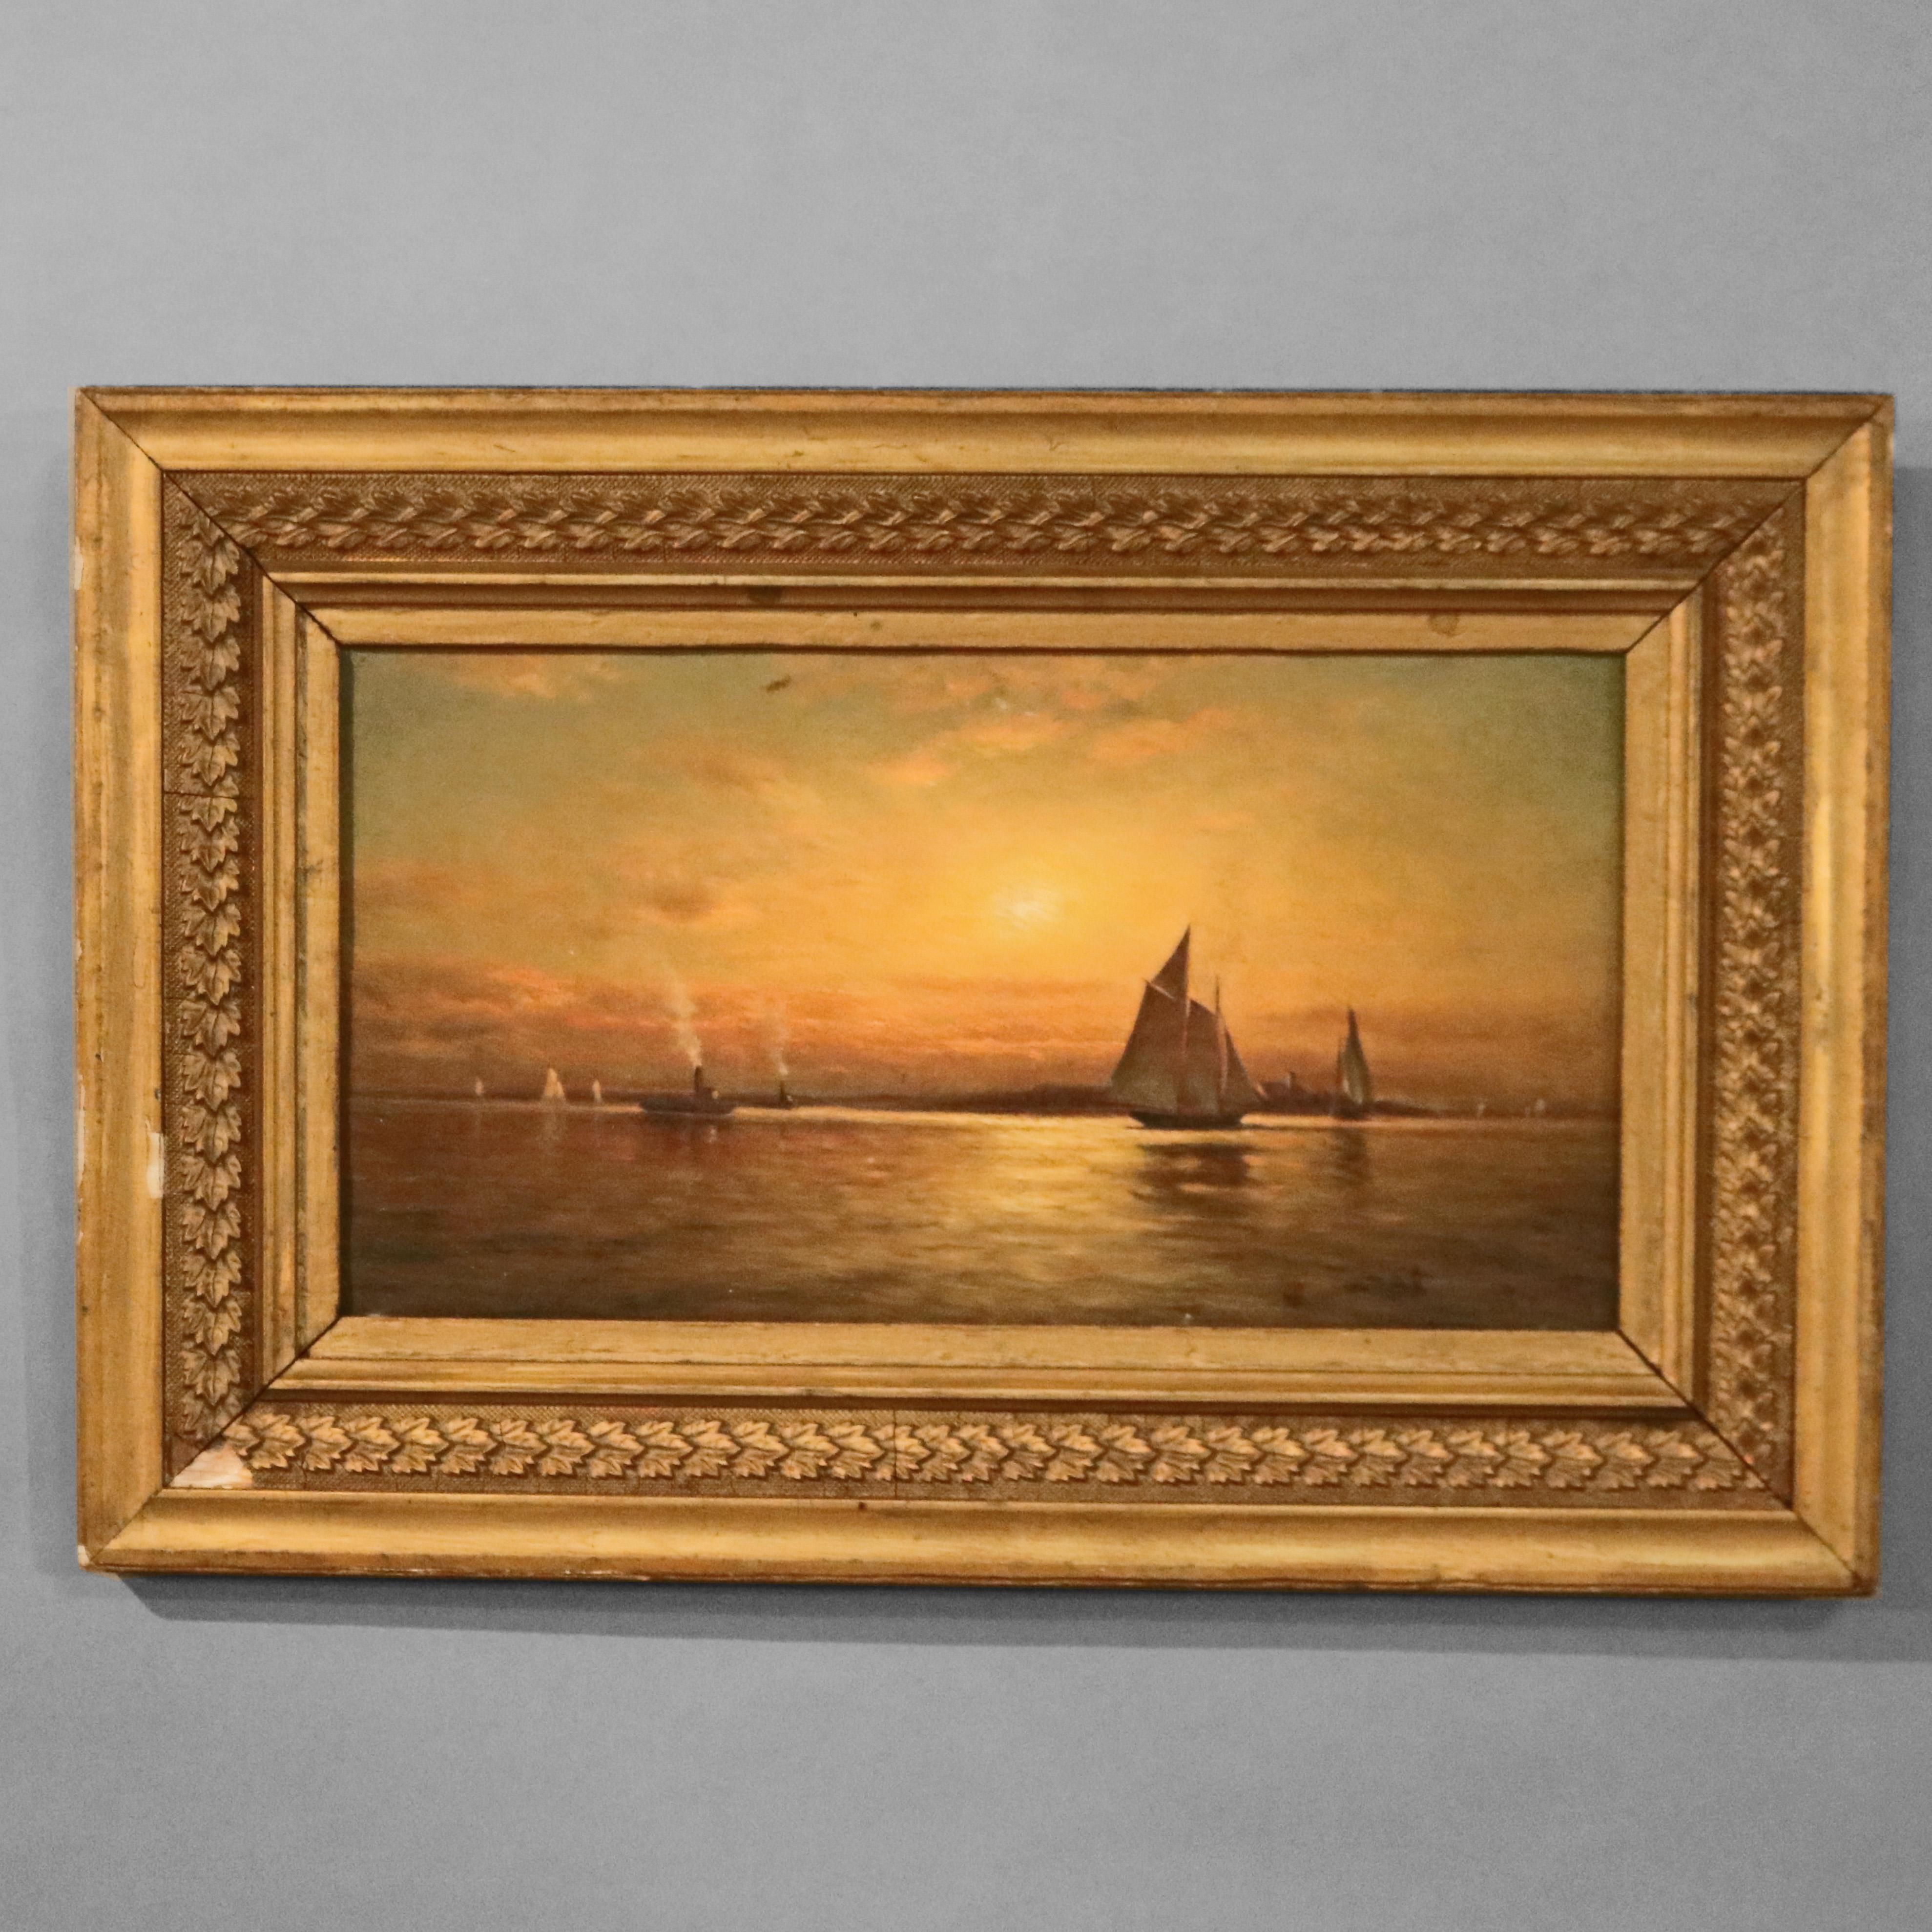 Hand-Painted Antique Nautical Seascape Painting with Sailboats & Steam Ships, c1880